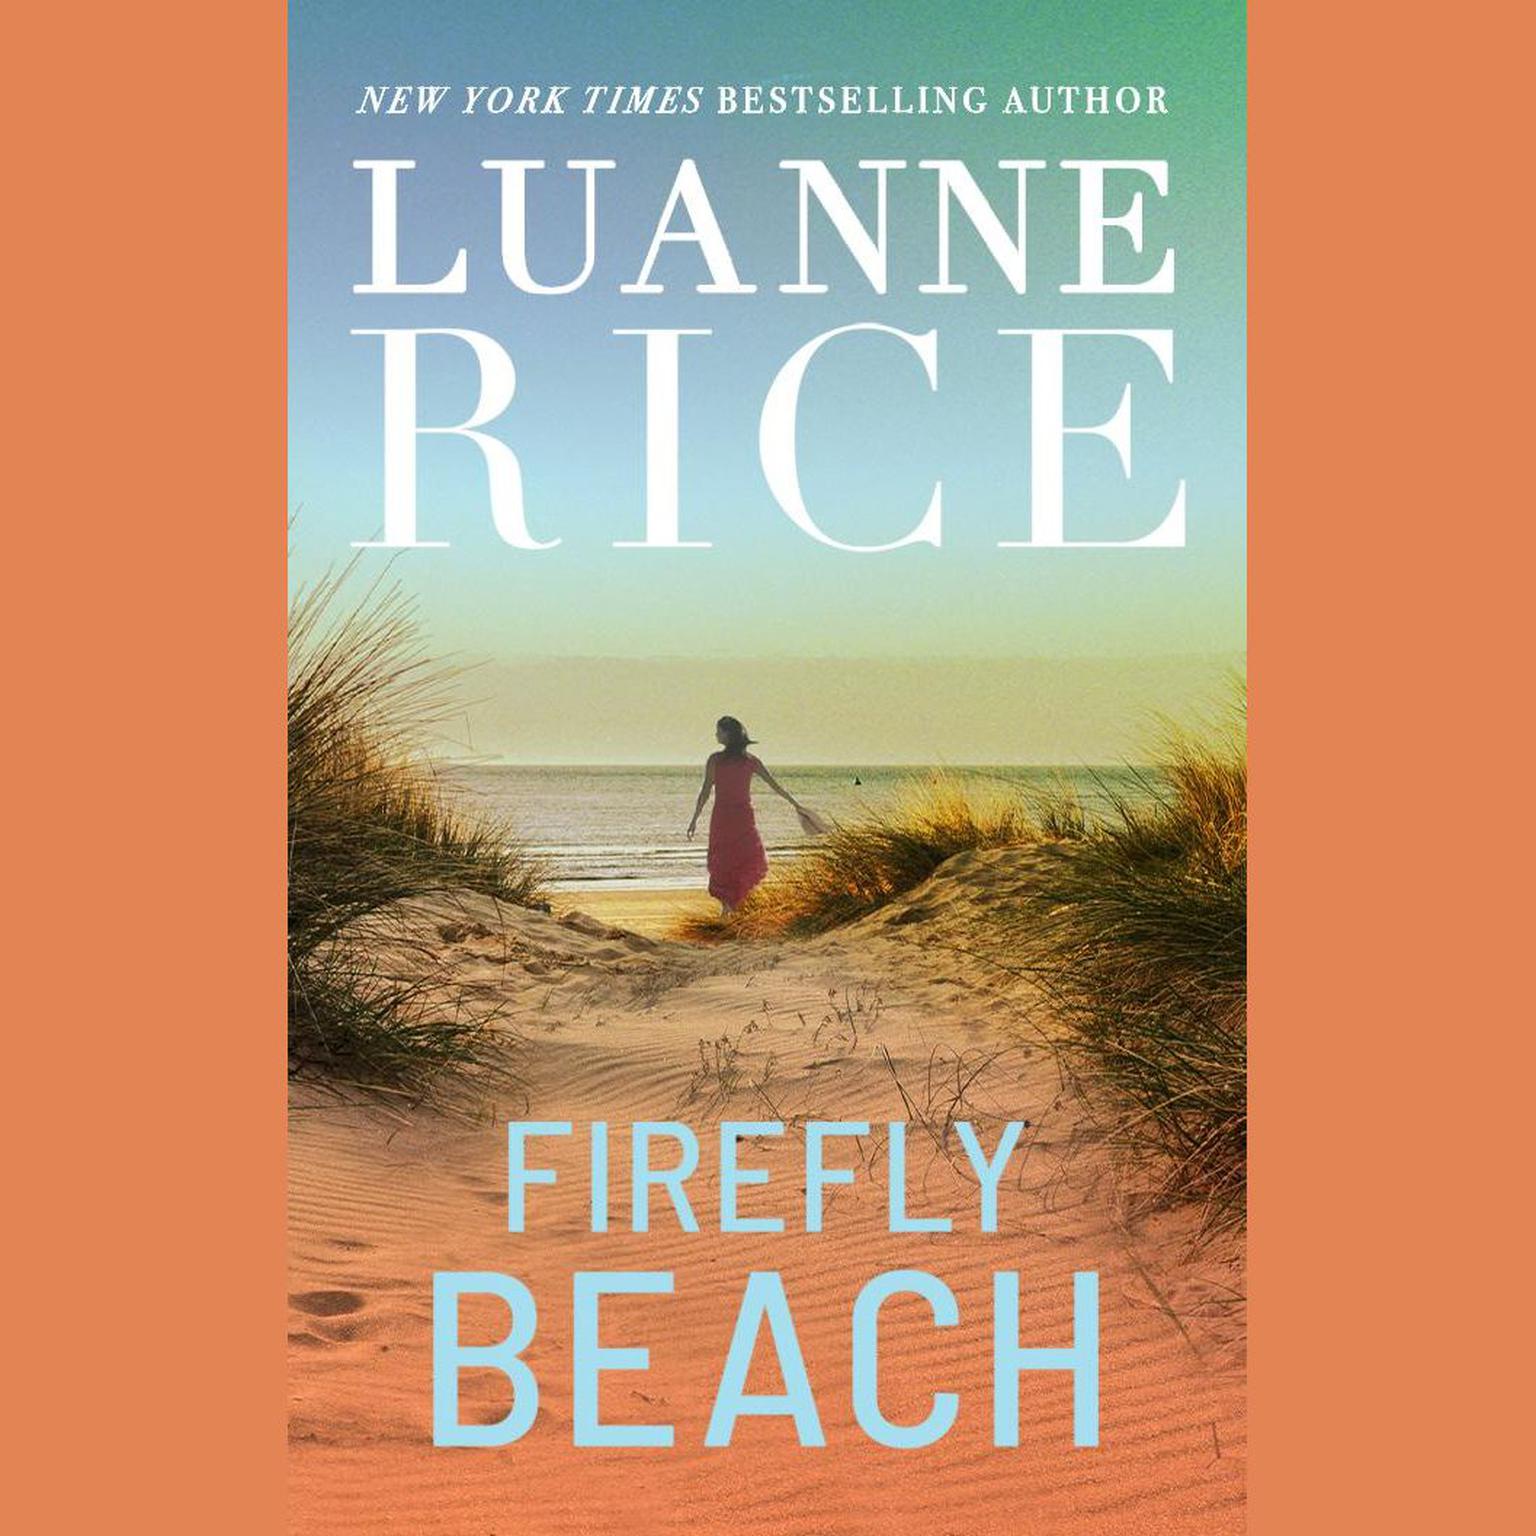 Firefly Beach Audiobook, by Luanne Rice